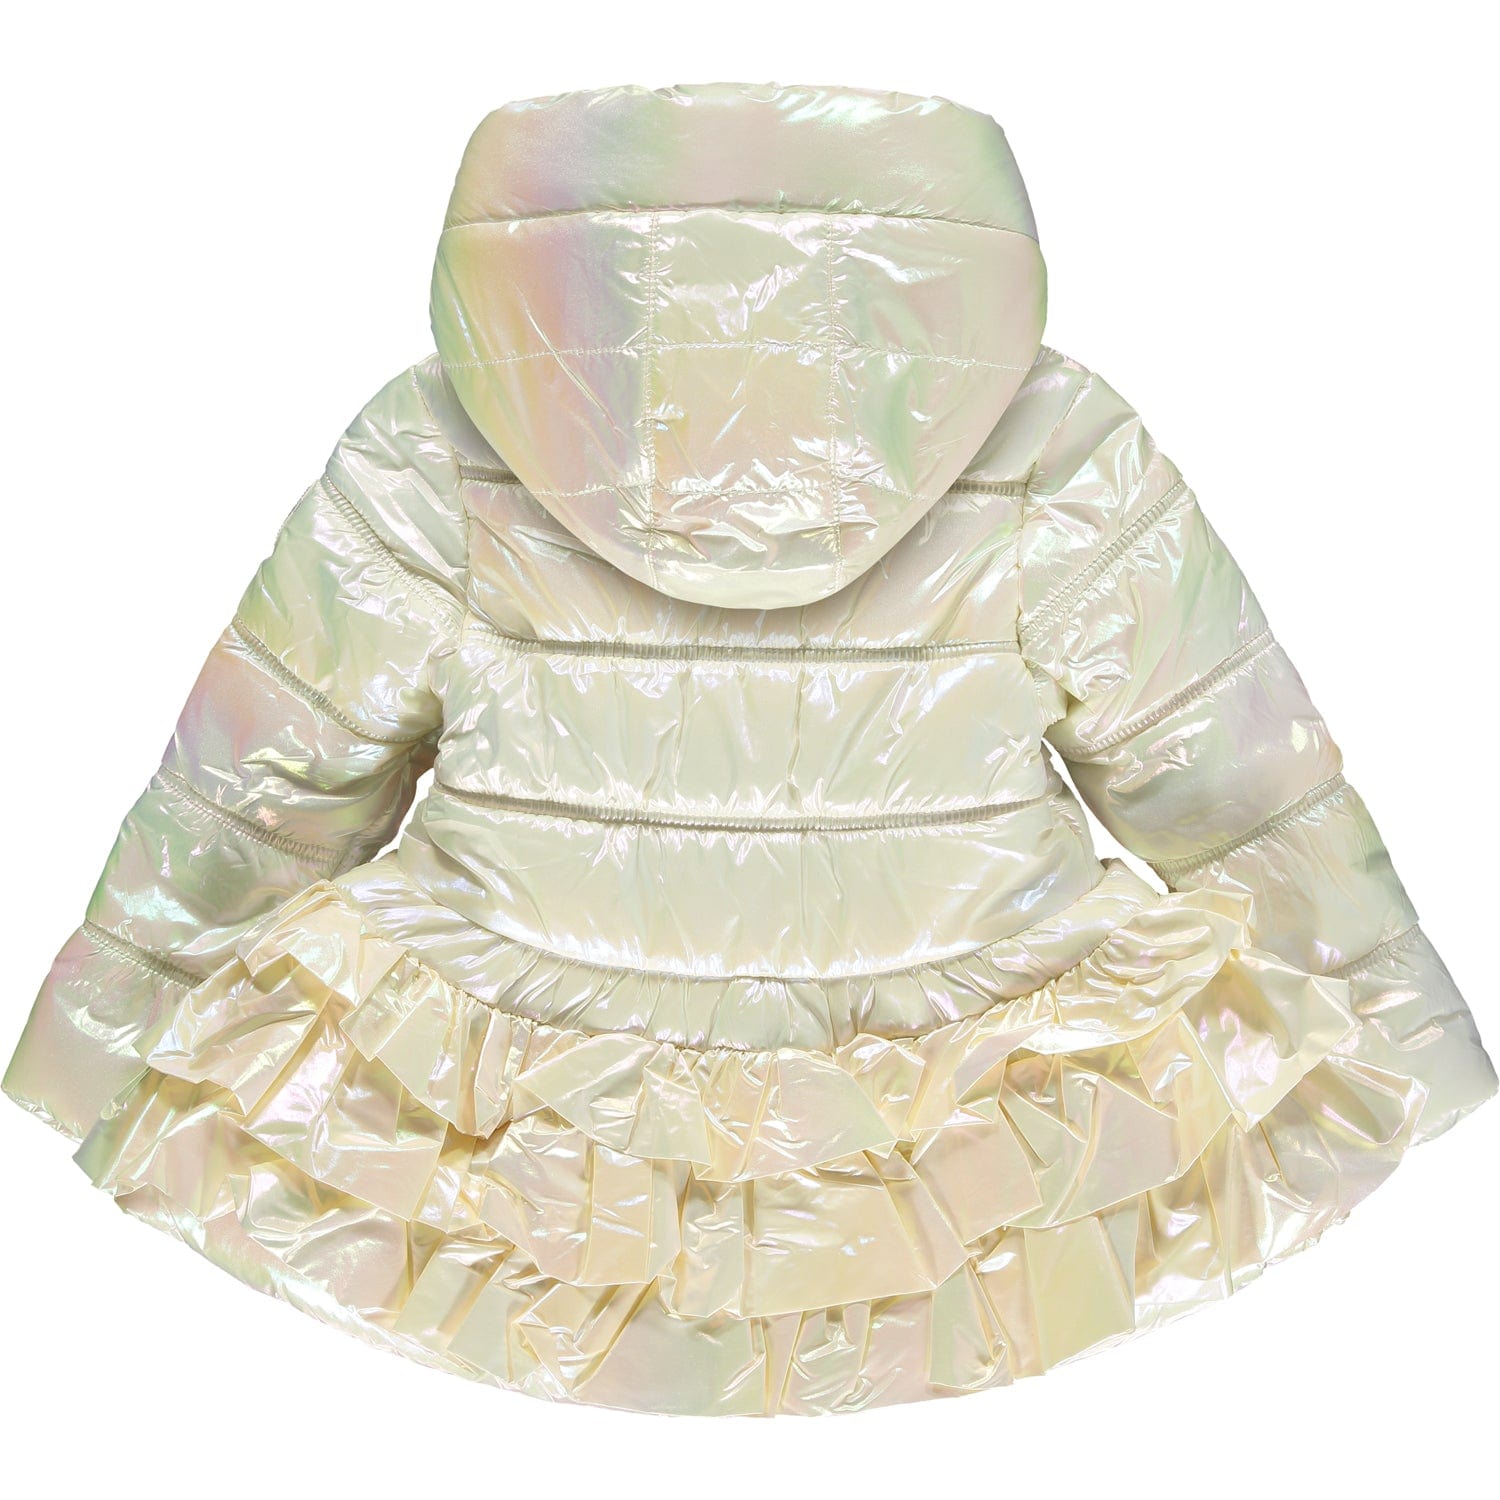 A DEE - Peony Dreams Amy Shimmer Jacket - White